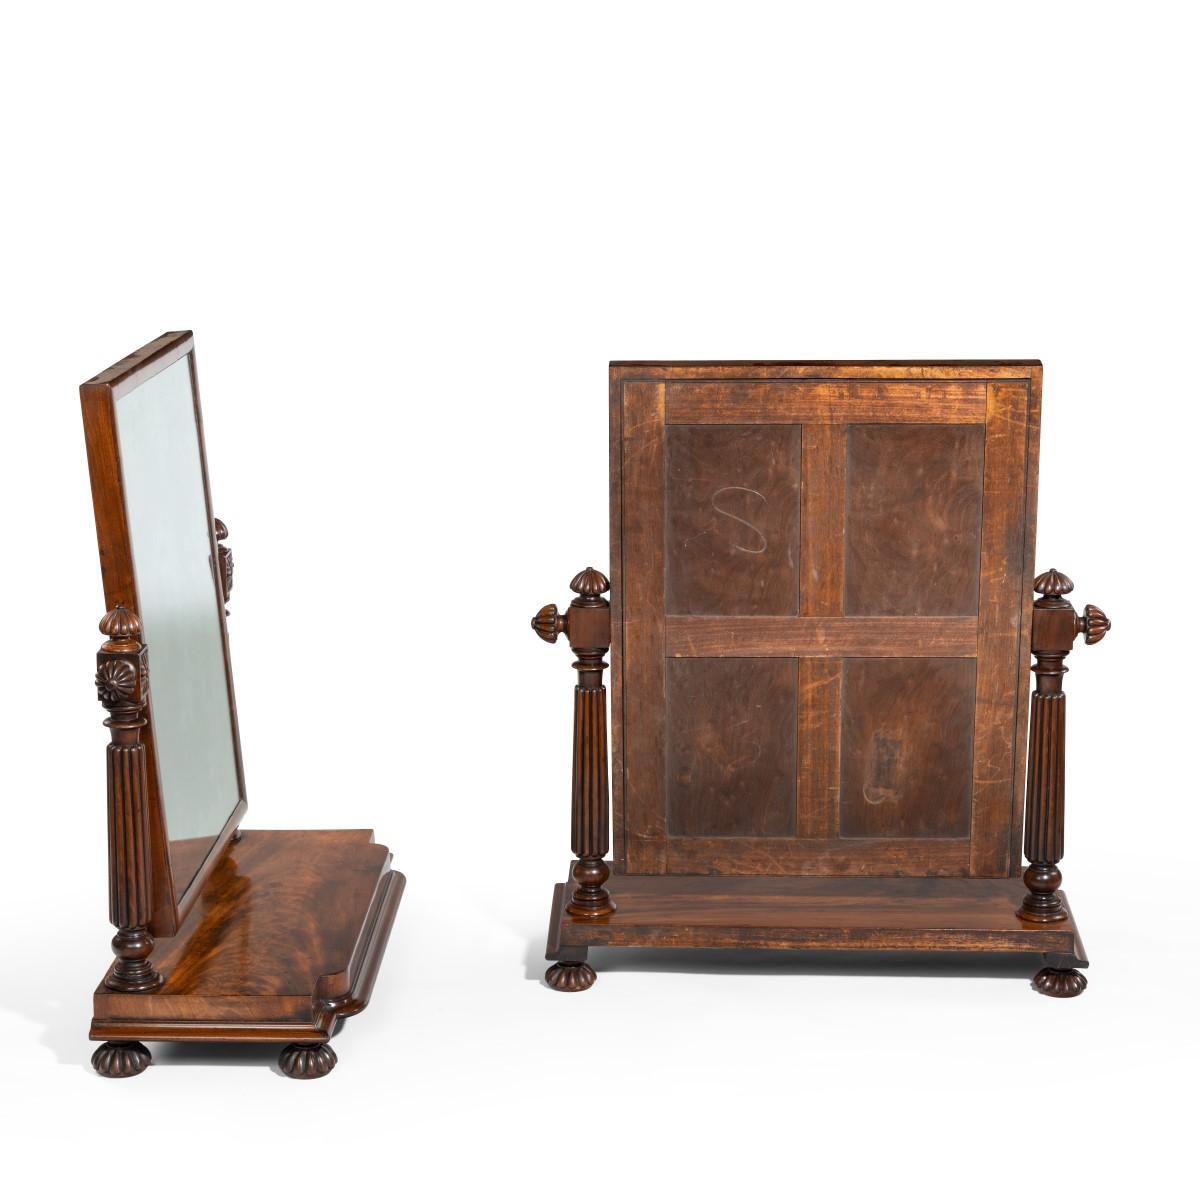 A pair of George IV mahogany table mirrors attributed to Gillows